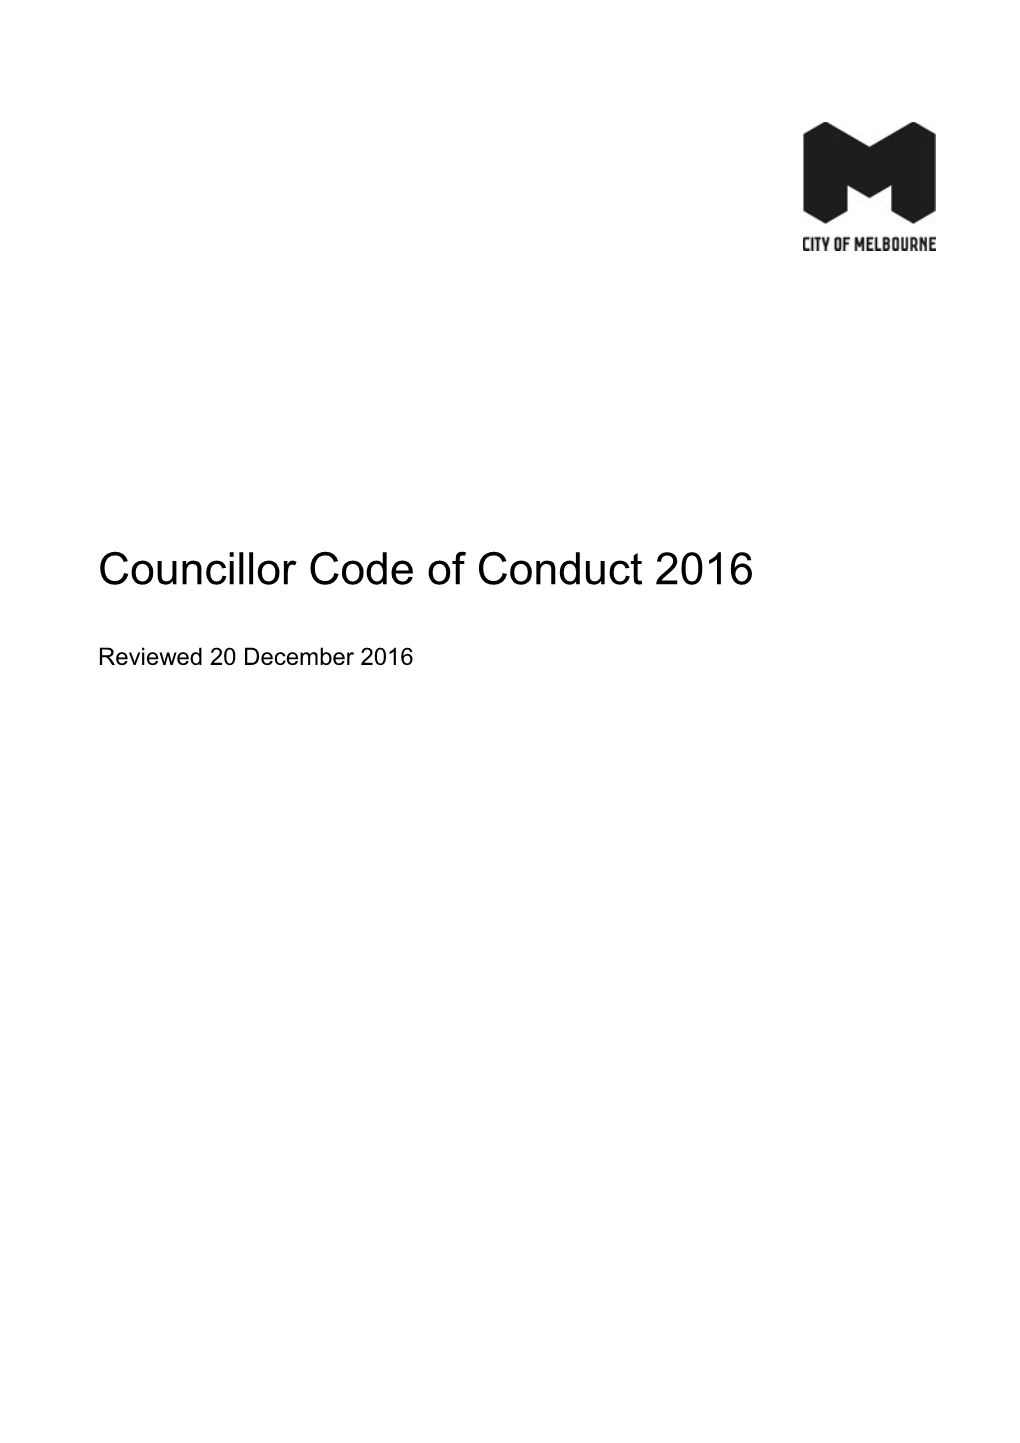 Councillor Code of Conduct 2016